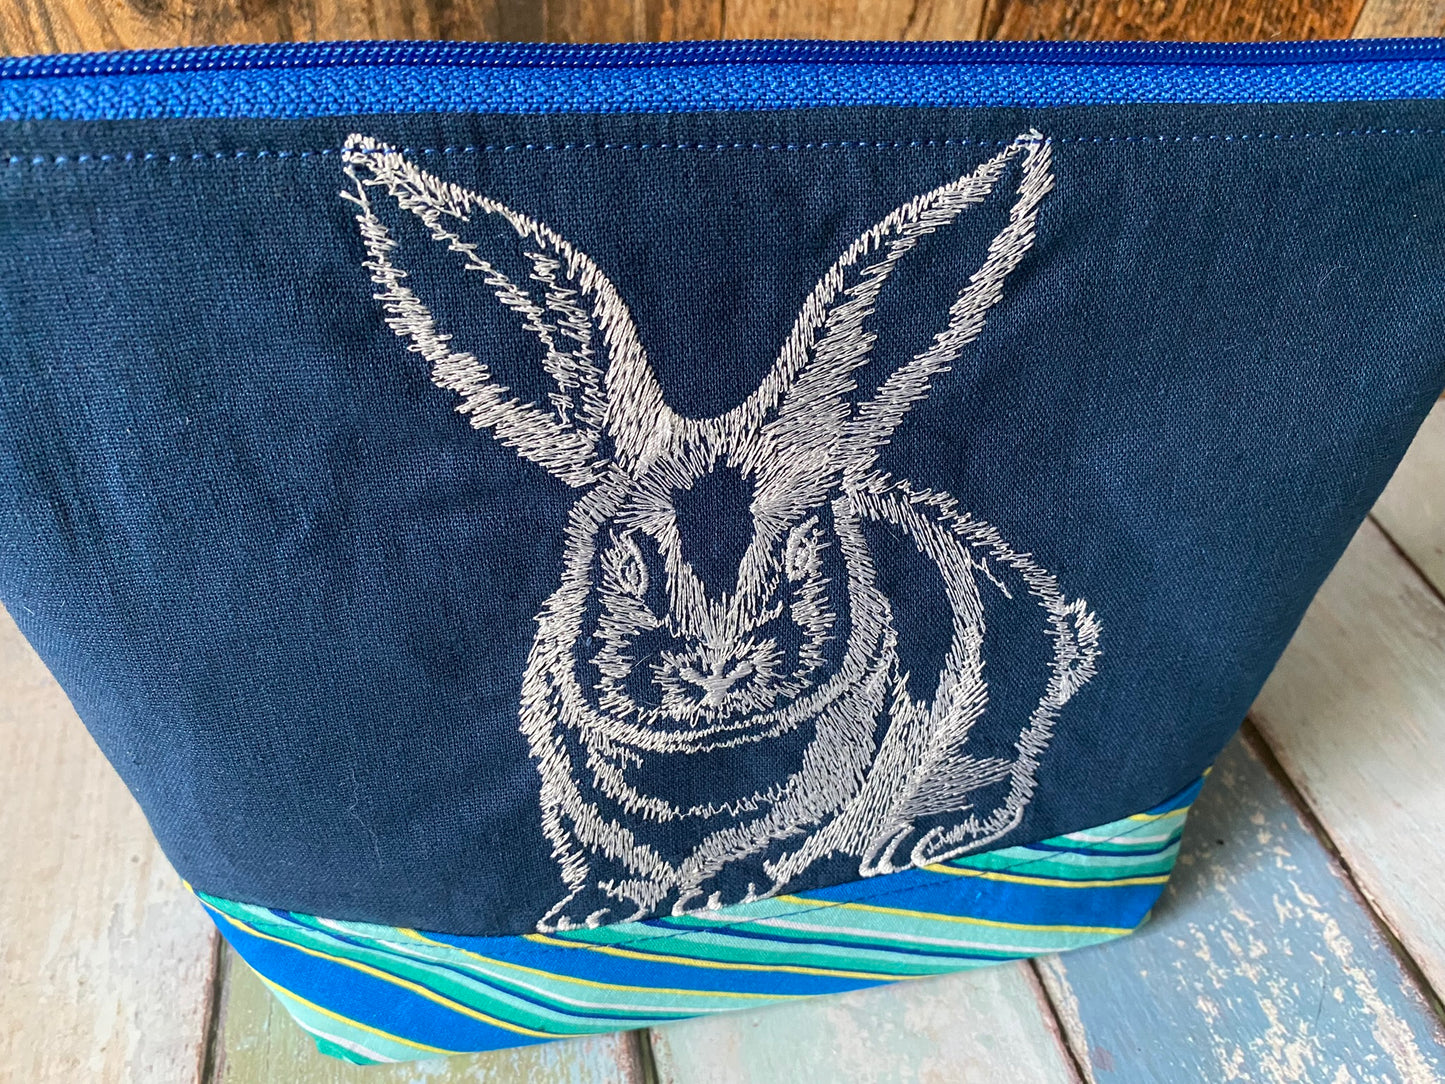 Fluffy Bunny Project or Cosmetic Zipper Bag